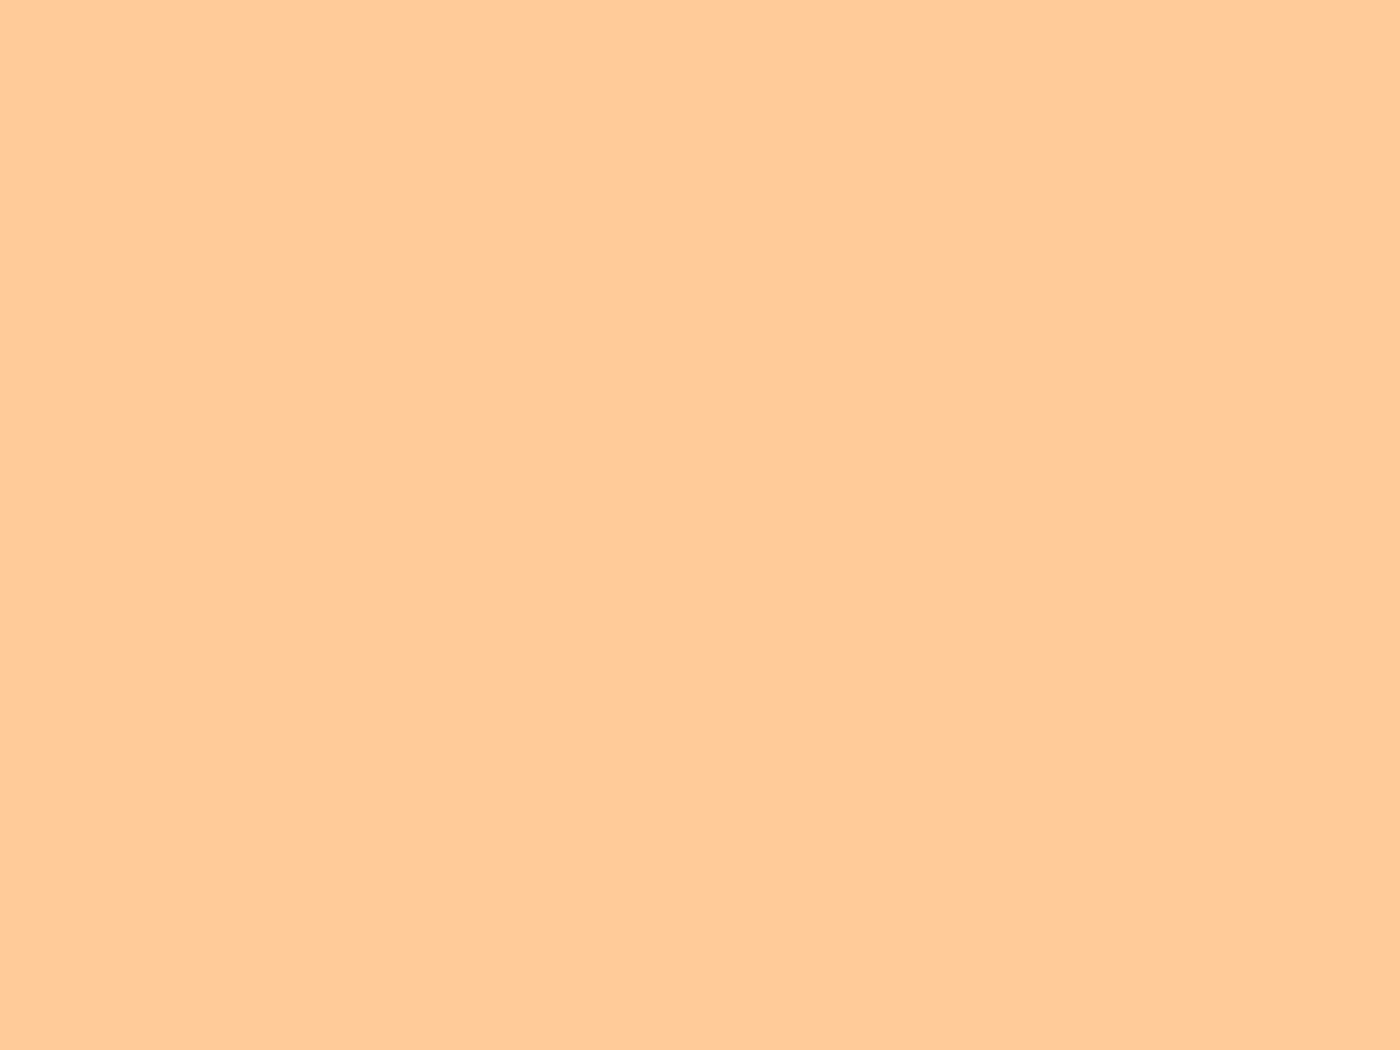 Free 1400x1050 resolution Peach orange solid color background view 1400x1050